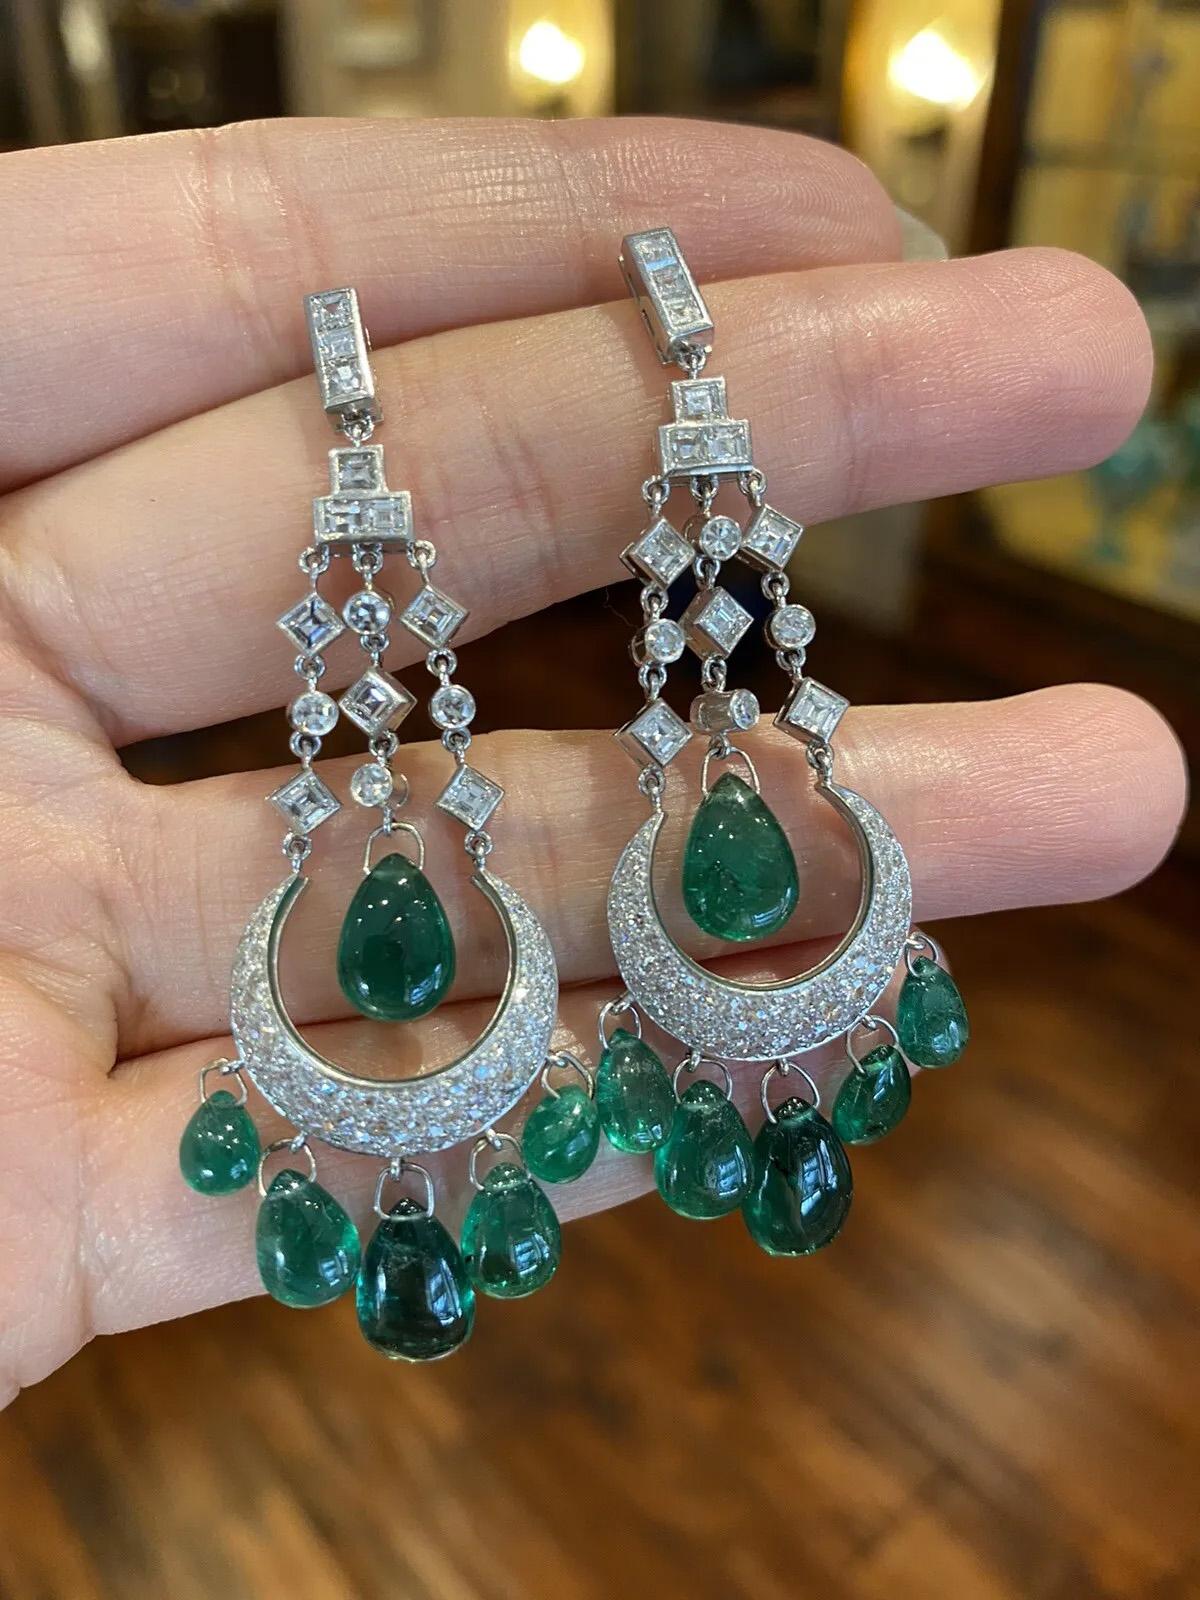 Chandelier Emerald Briolettes and Diamond Drop Earrings 21.31 Carat Total Weight in Platinum

Vintage Emerald Diamond Drop Earrings features 12 deep bright green Cabochon Briolette Emeralds and a mix of square cut and Single Cut Round Diamonds set